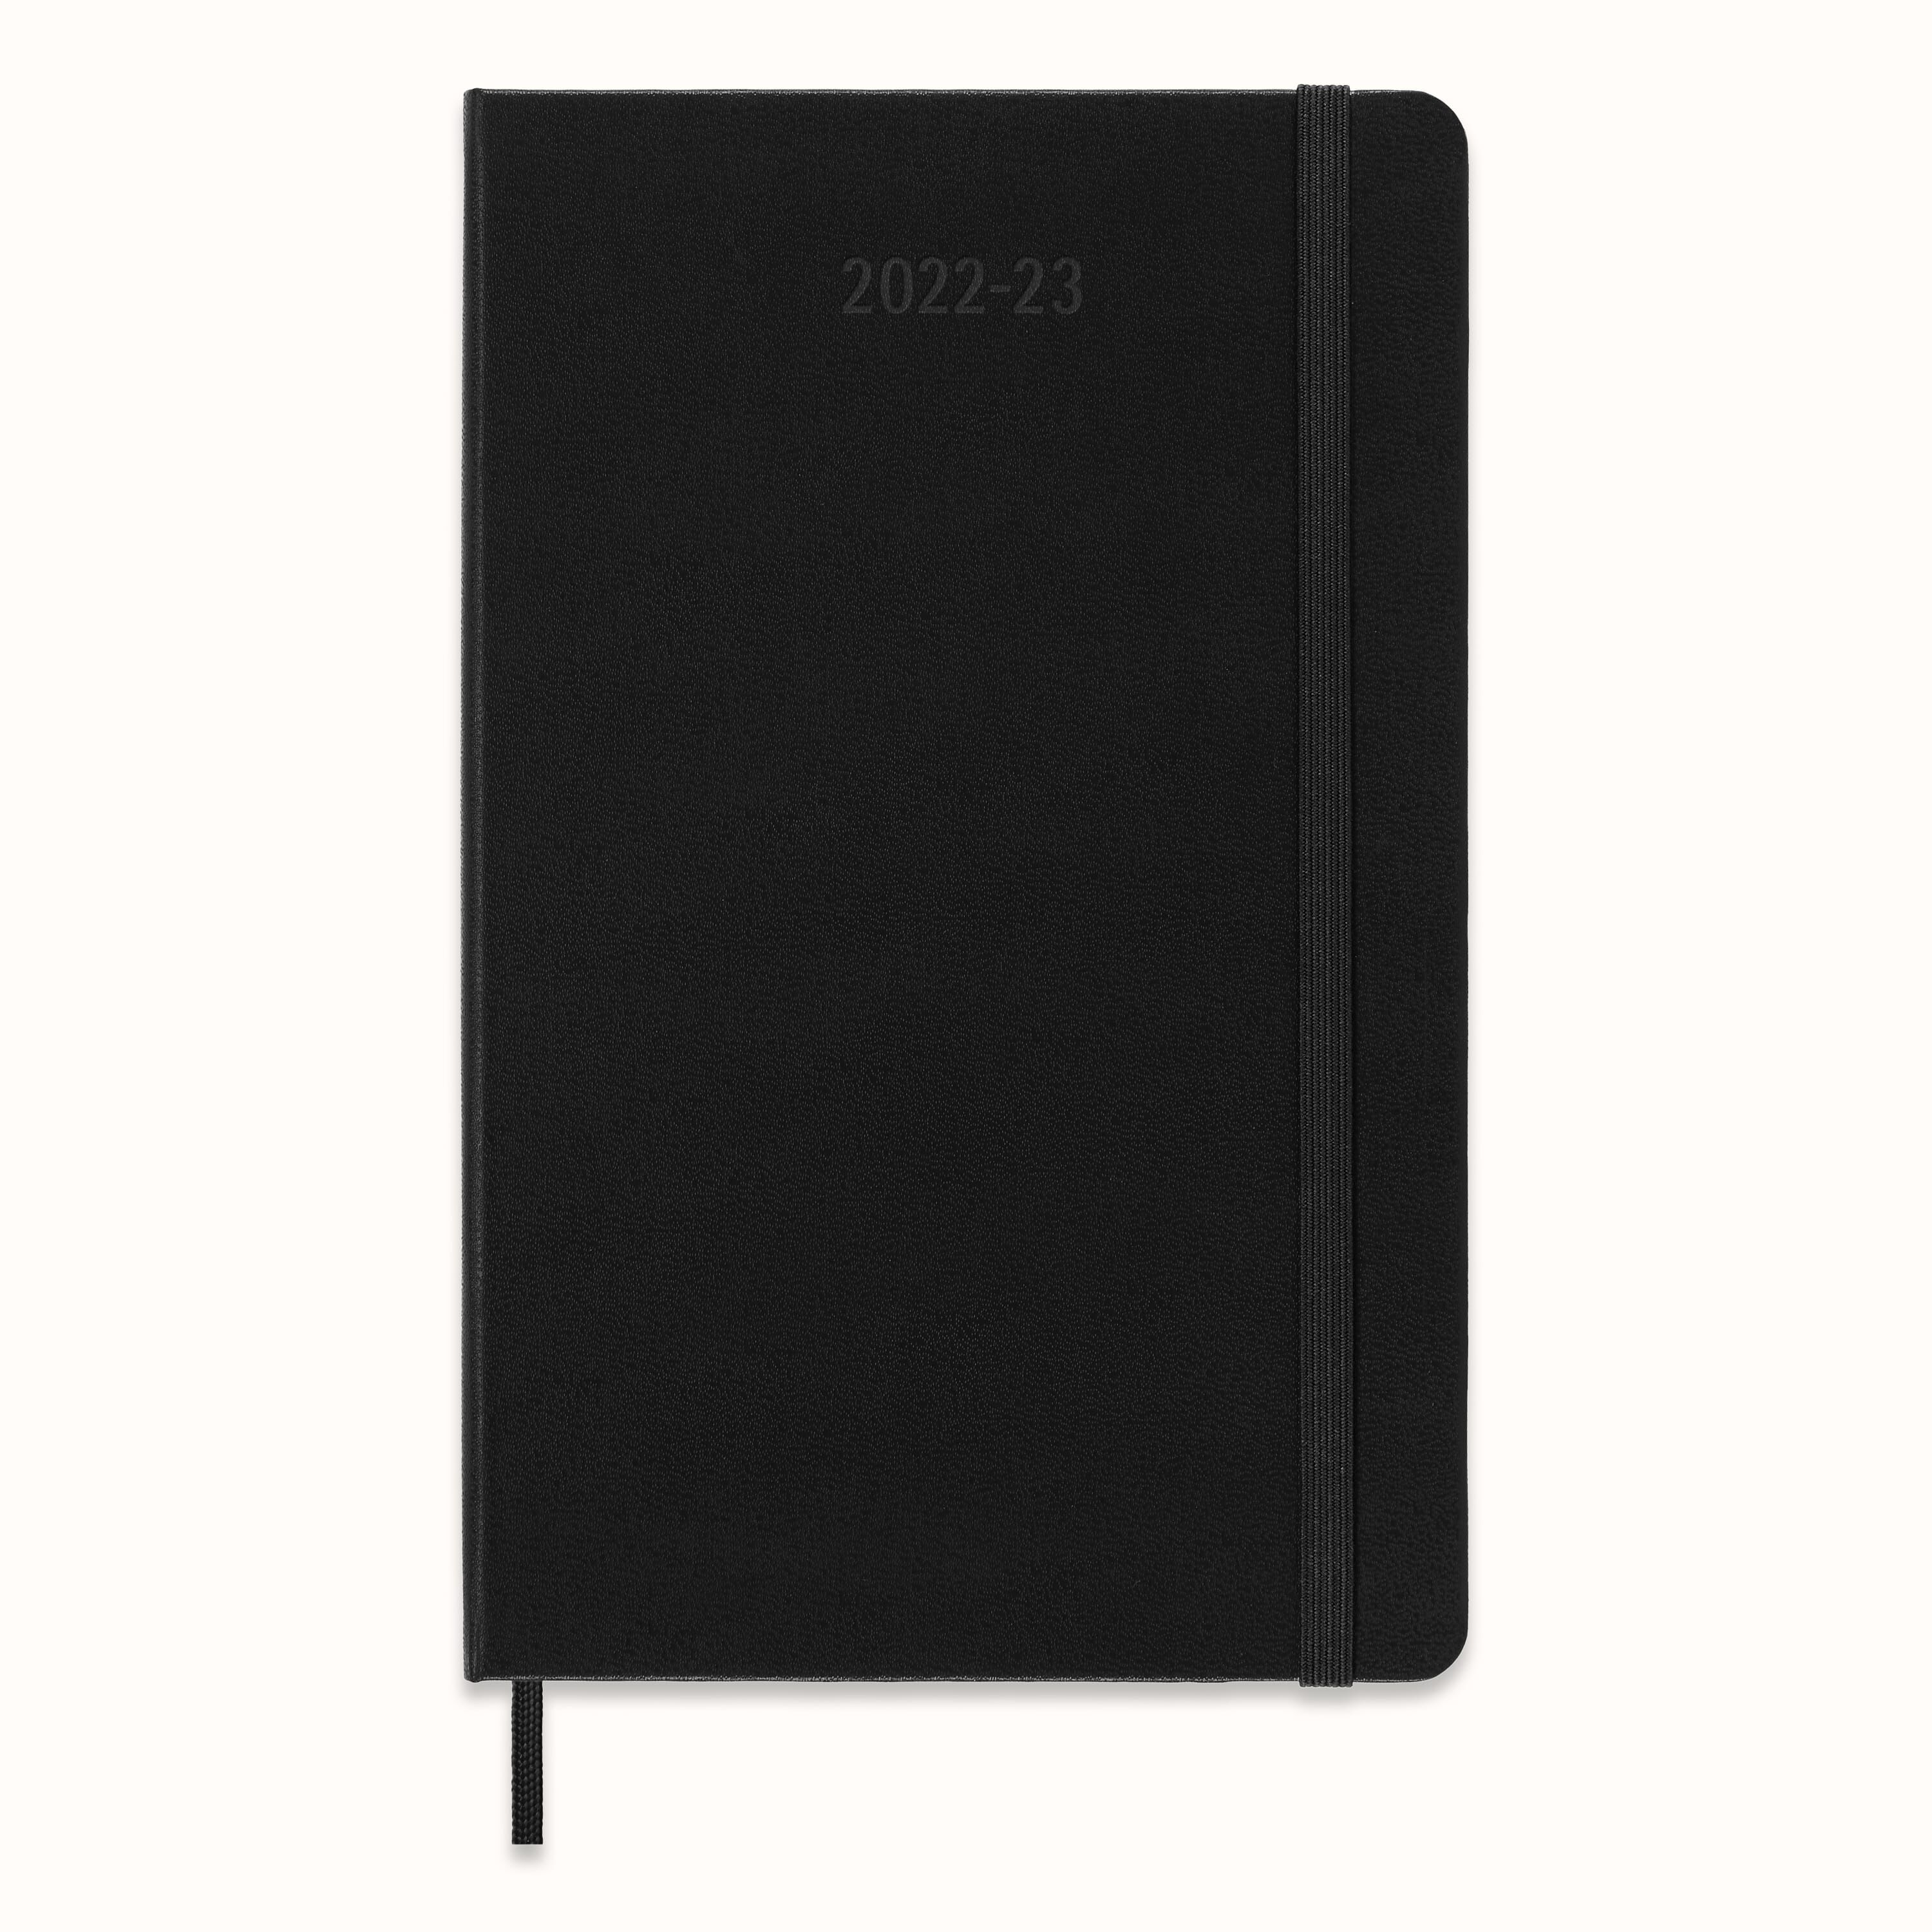 NEW Moleskine 18 Month 2020-2021 Weekly Planner Soft Cover XL 7.5" x 9.5" Black 